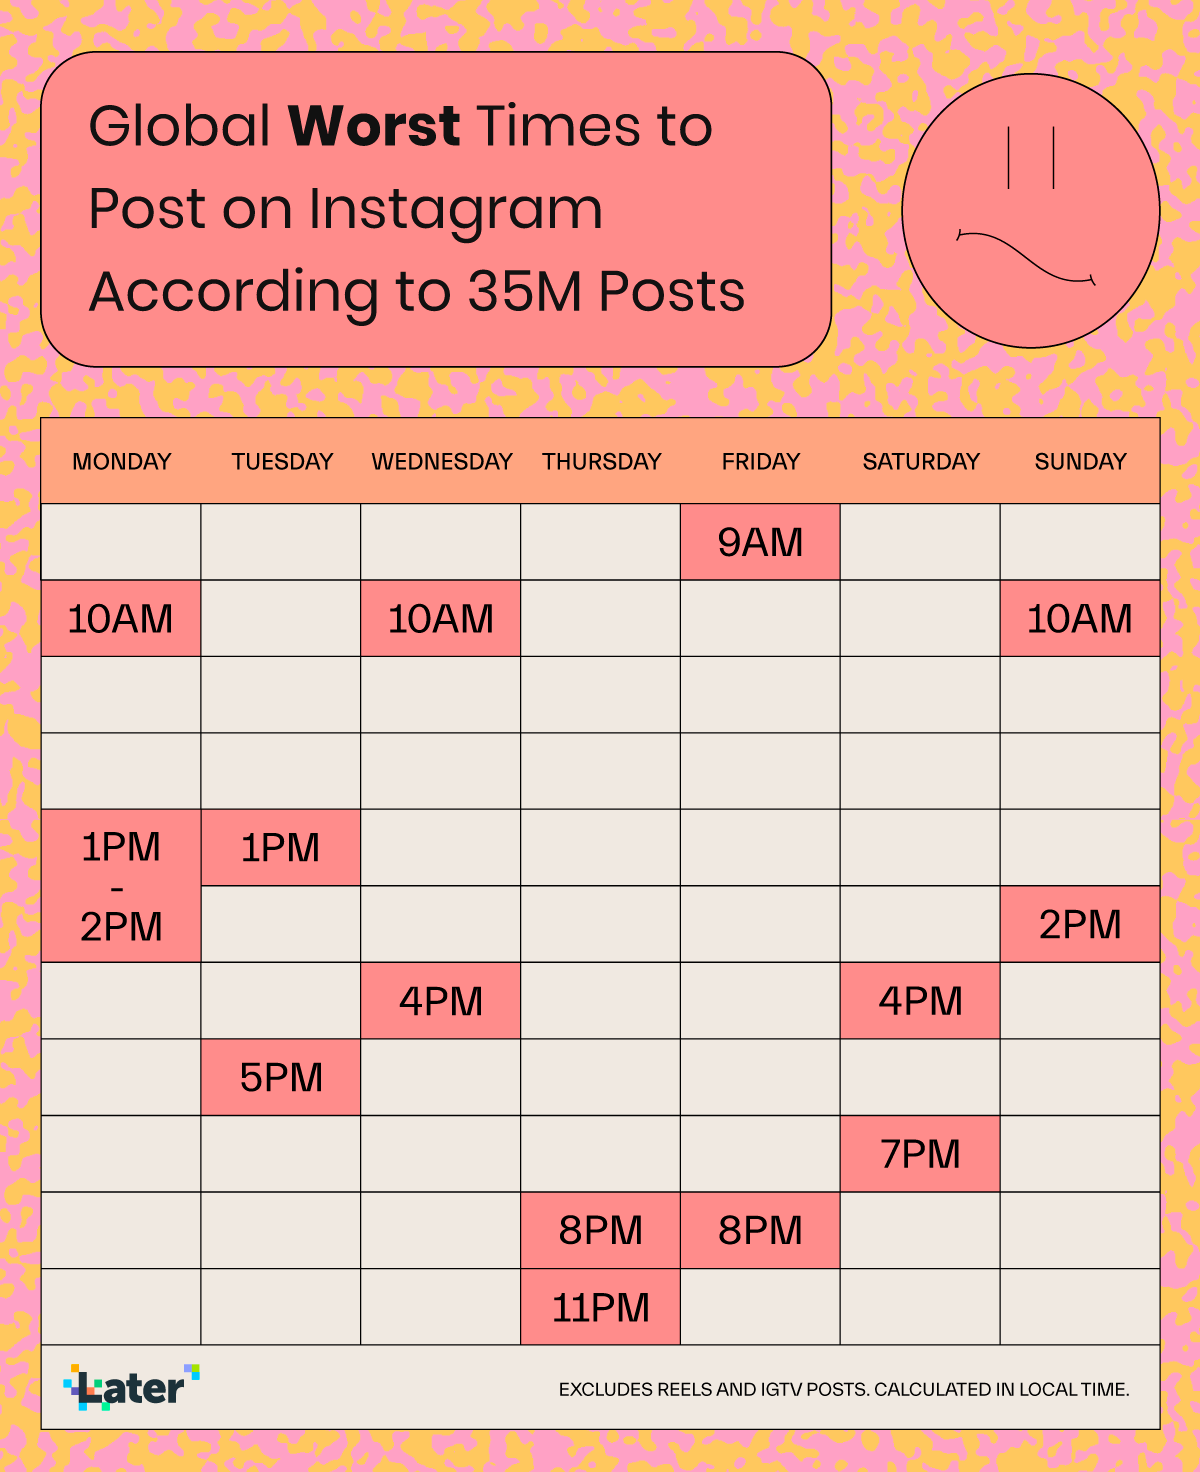 Chart showing the global worst times to post on Instagram